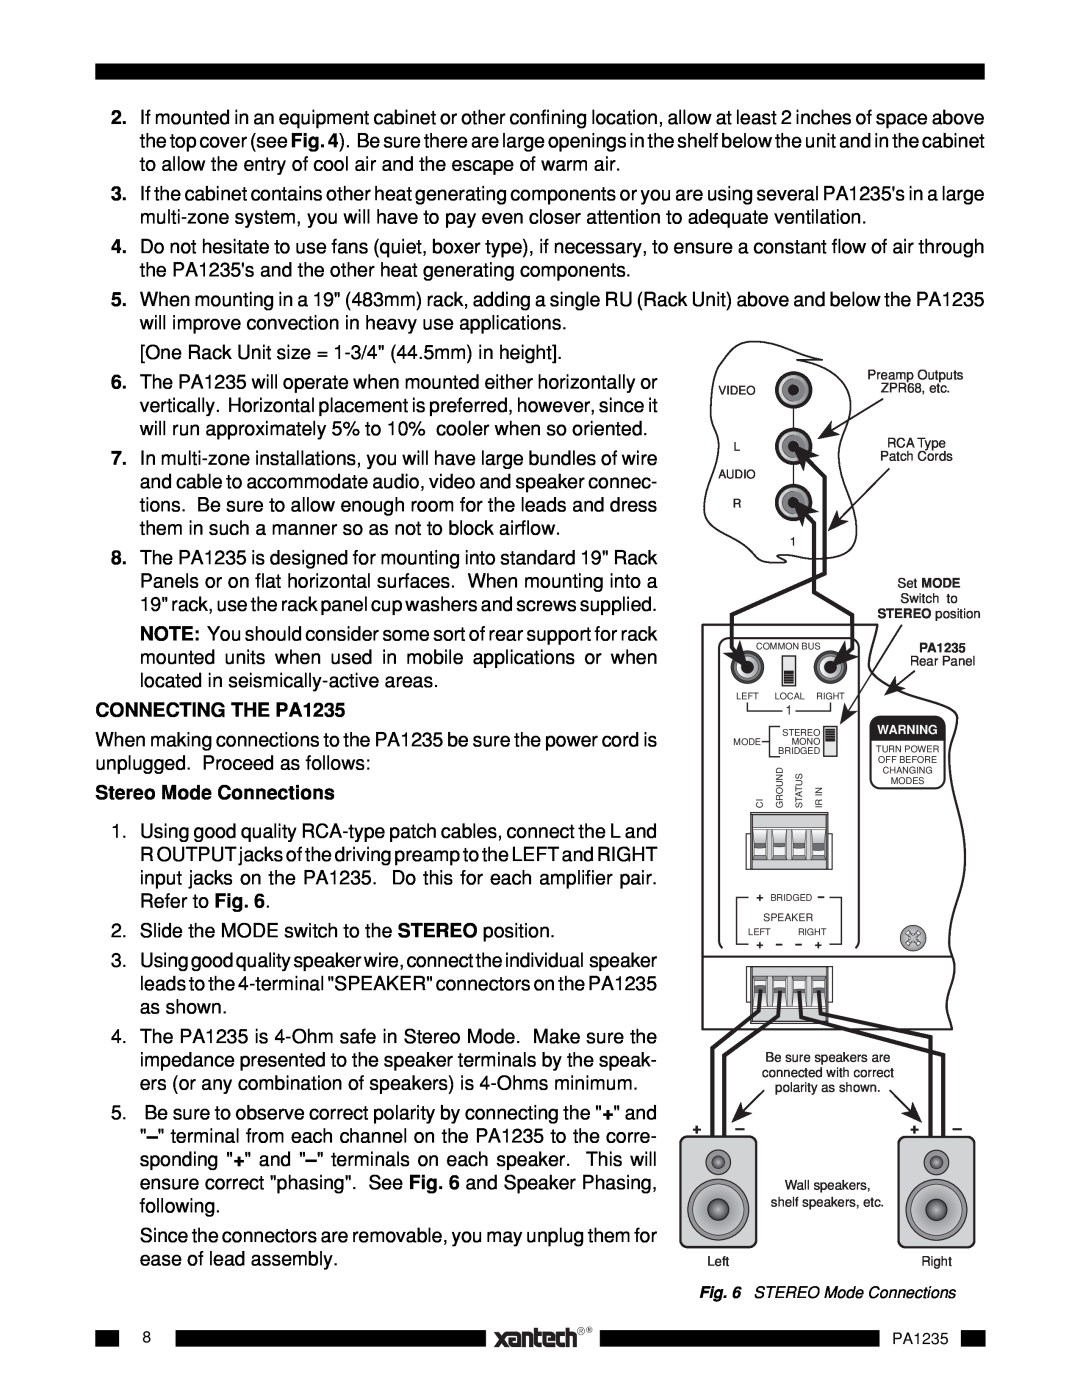 Xantech installation instructions CONNECTING THE PA1235, Stereo Mode Connections 